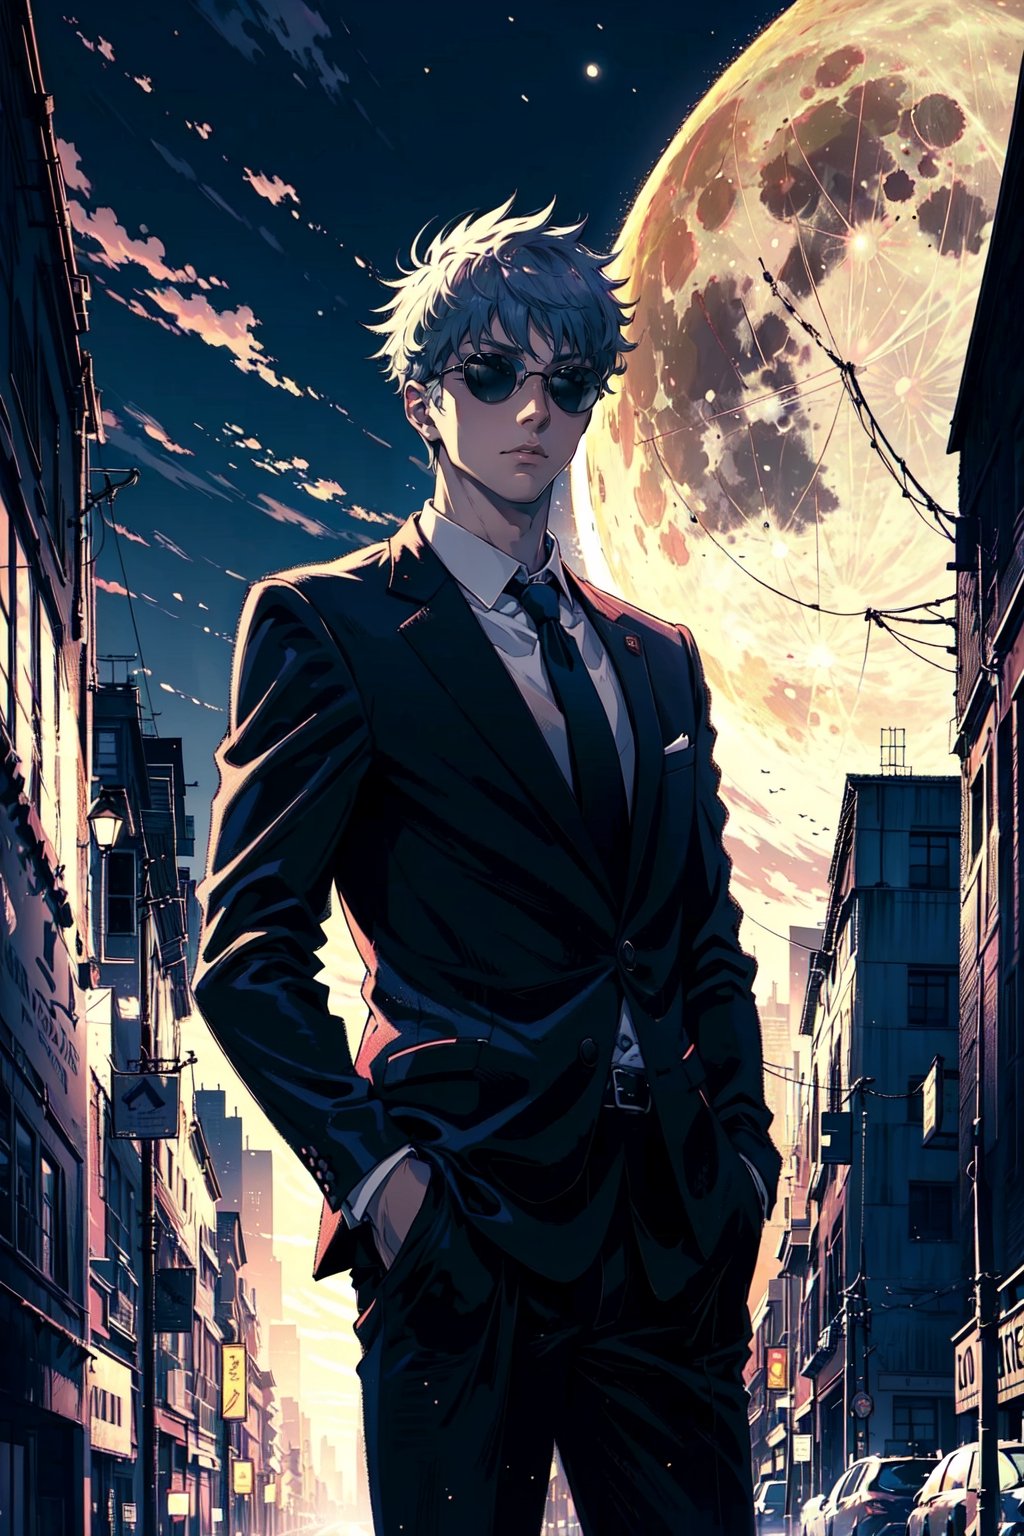 man mature, Hands in the pocket, in the background a city, car, fullmoon, work of art, wallpaper, soft shading, suit without tie, pastelbg, 